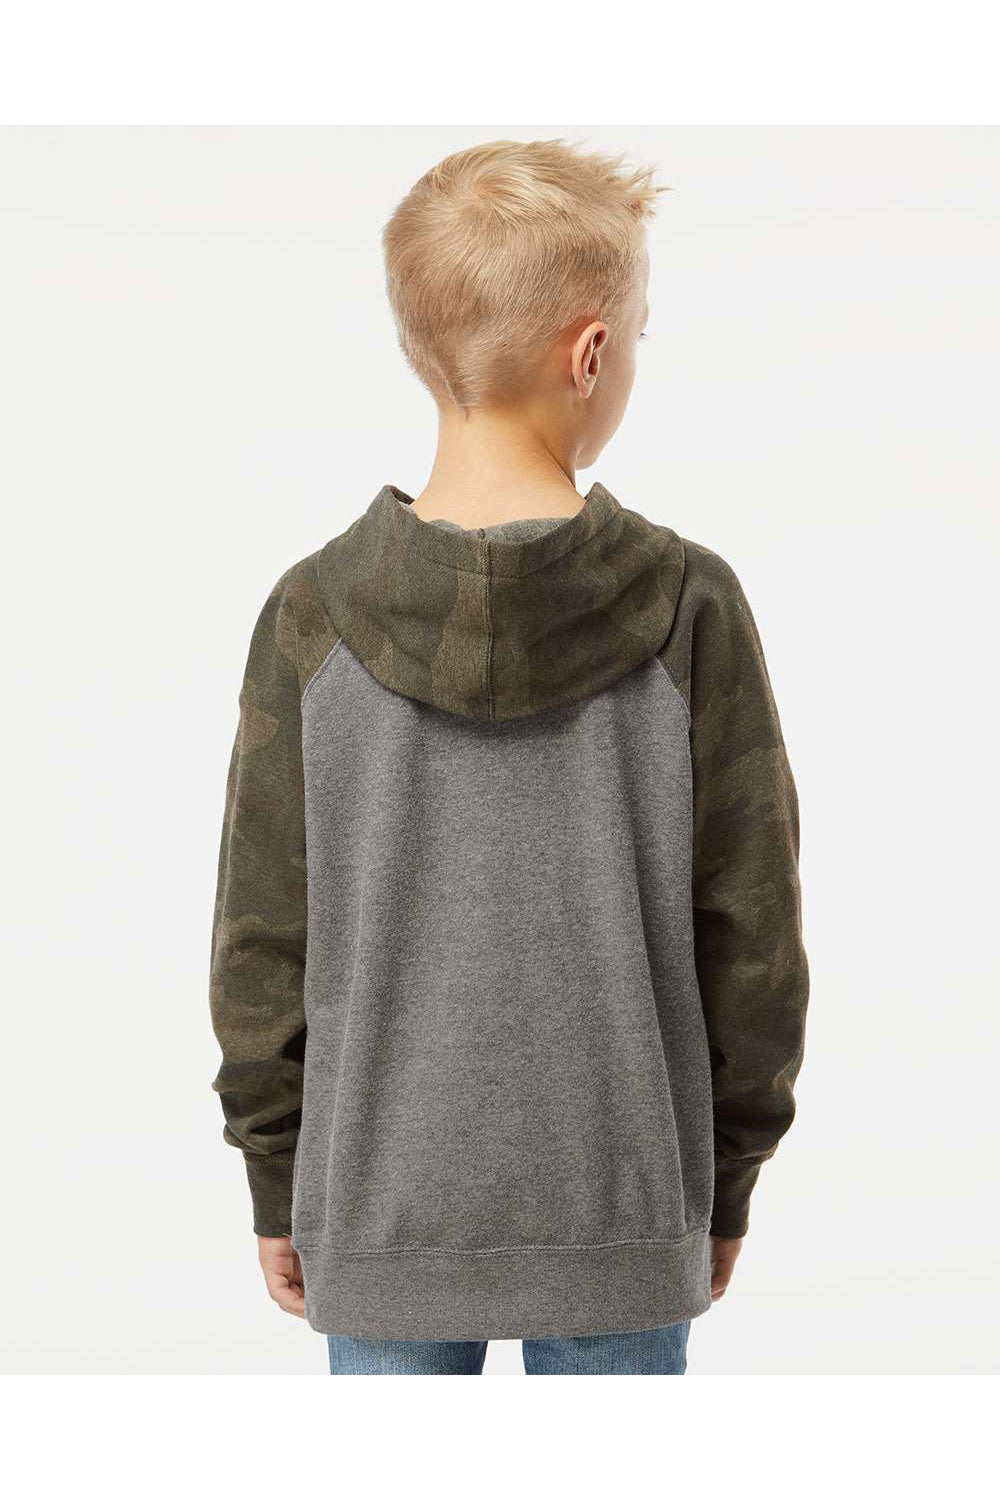 Independent Trading Co. PRM15YSB Youth Special Blend Raglan Hooded Sweatshirt Hoodie Heather Nickel Grey/Forest Green Camo Model Back